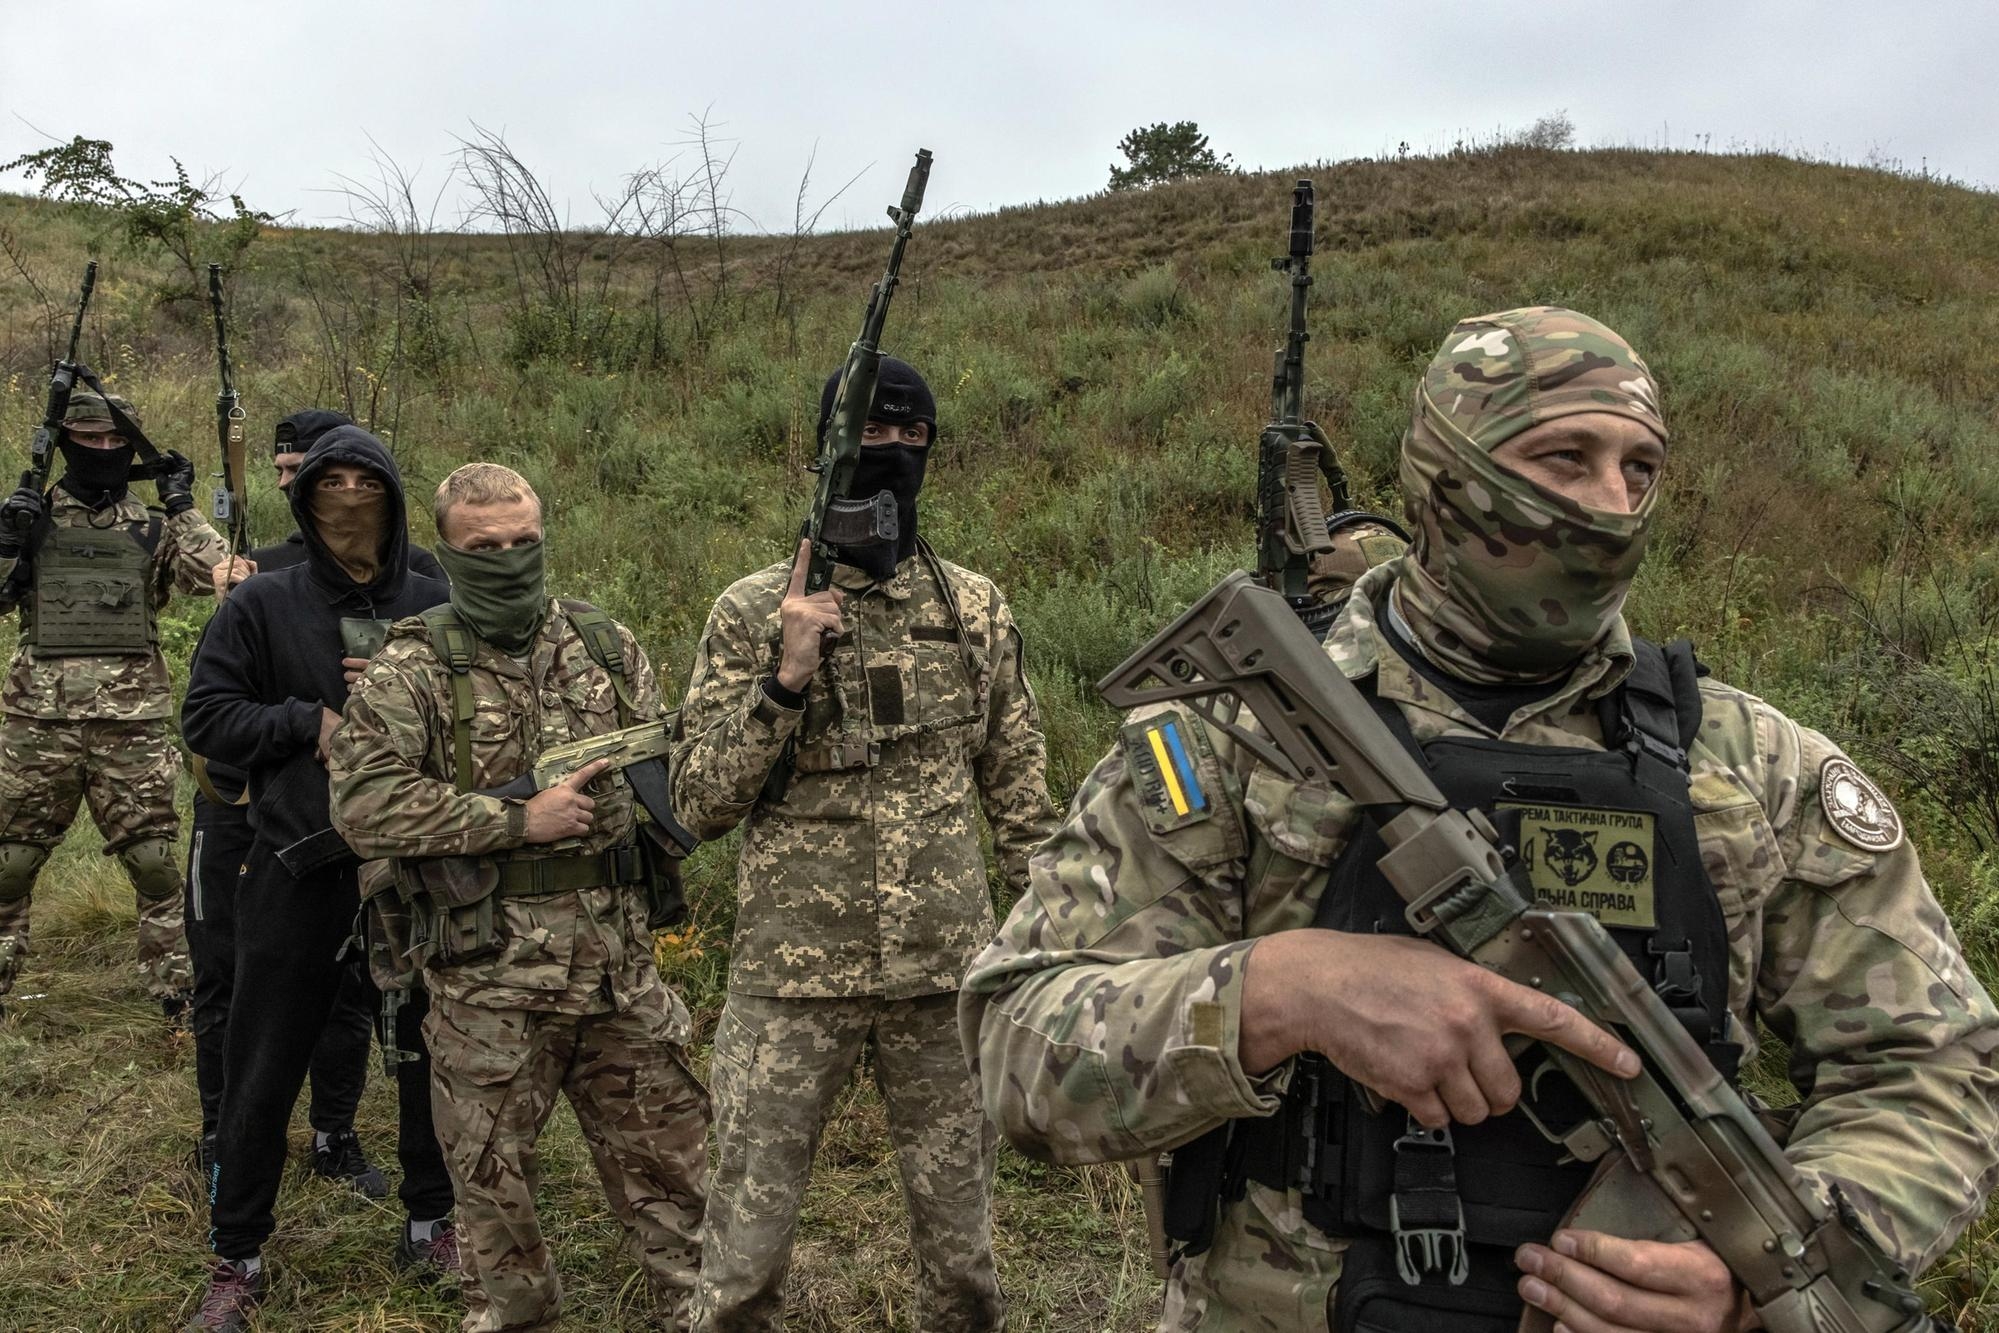 epa10190321 Volunteers of the Dzhokhar Dudayev Battalion wait with weapons during the training in the Kyiv region, Ukraine, 17 September 2022. The battalion is made up mostly of Chechen volunteers who had fought in the two Chechen wars and has joined defending Ukraine's side against the Russian invasion. Most of the members from Dzhokhar Dudayev Battalion were taking part in the liberation of the town of Izyum, during the recent rapid counter-offensive by Ukraine's armed forces in the Kharkiv region. EPA/ROMAN PILIPEY